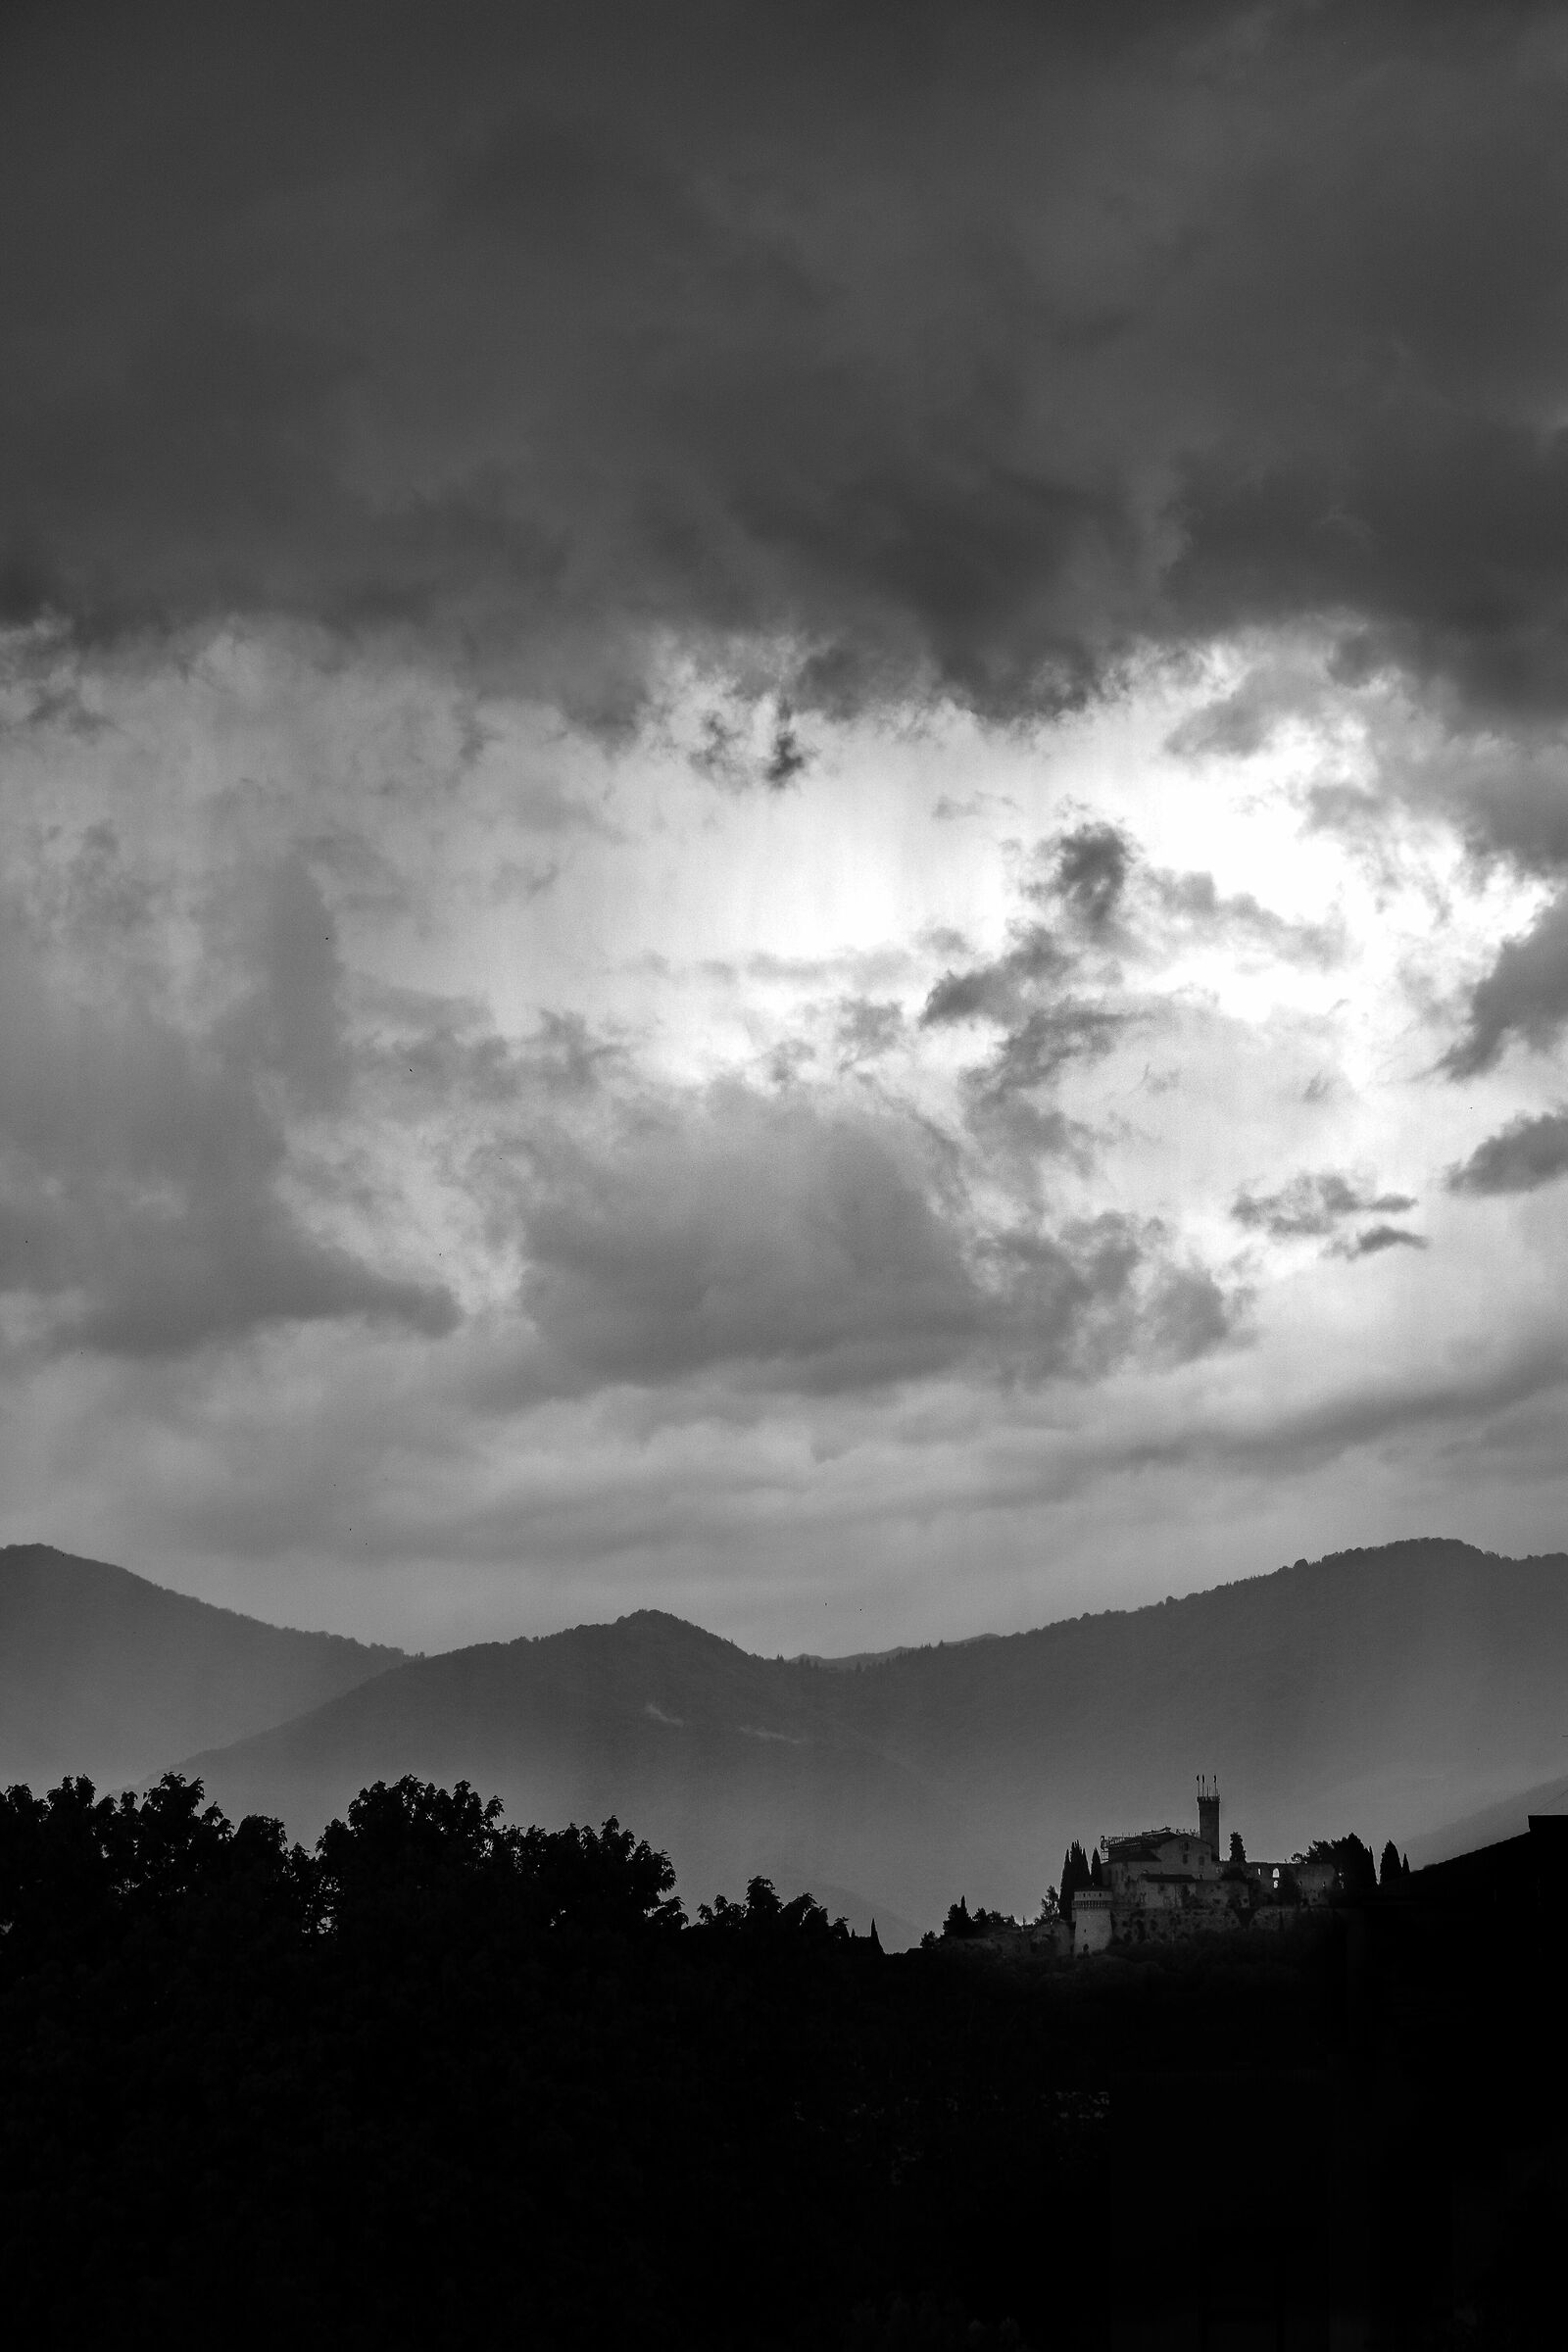 A breath away from the storm - Brescia...